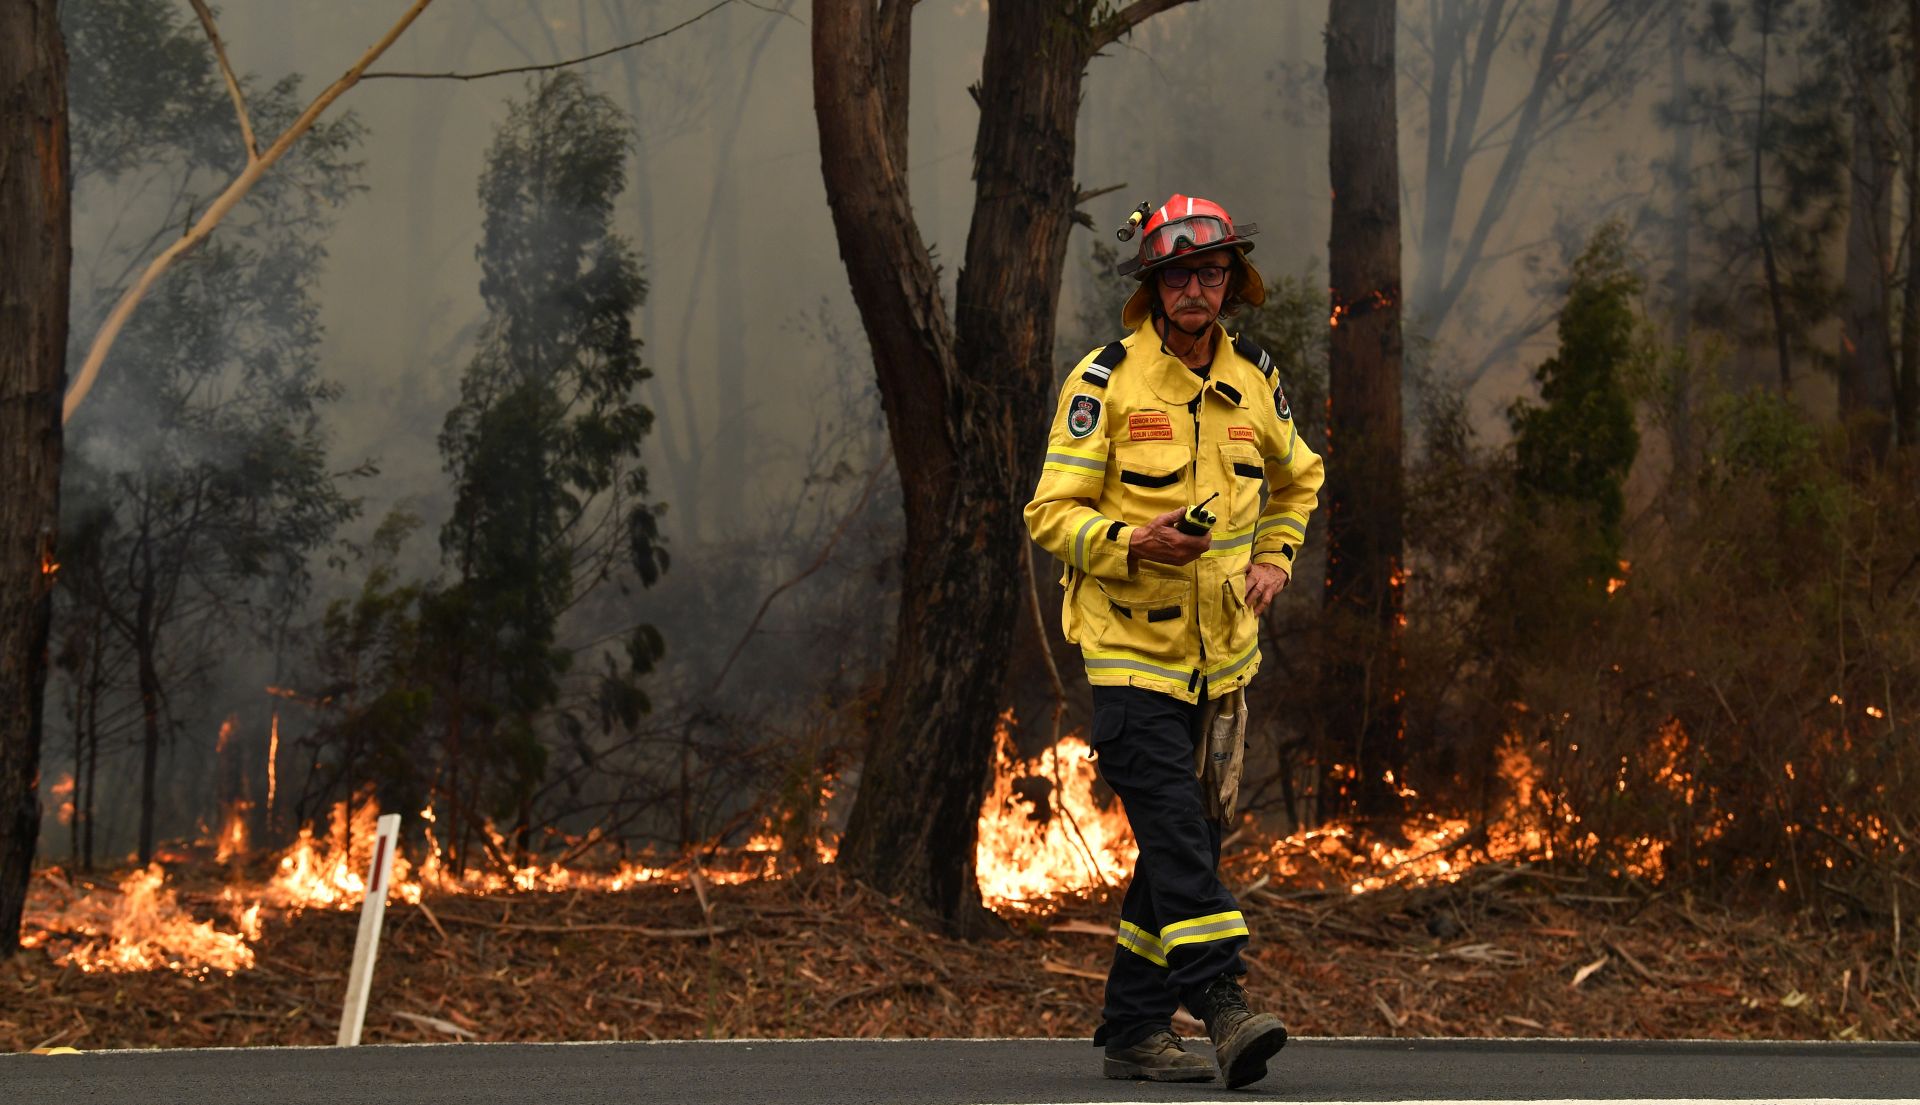 epa08103583 A firefighter works to contain a small bushfire, which closed the Princes Highway, near Ulladulla, Australia, 05 January 2020. According to media reports, at least 1,200 homes in Victoria and New South Wales have been destroyed by fires this season, at least 18 people have died, and more than 5.9 million hectares have been burnt.  EPA/DEAN LEWINS  AUSTRALIA AND NEW ZEALAND OUT